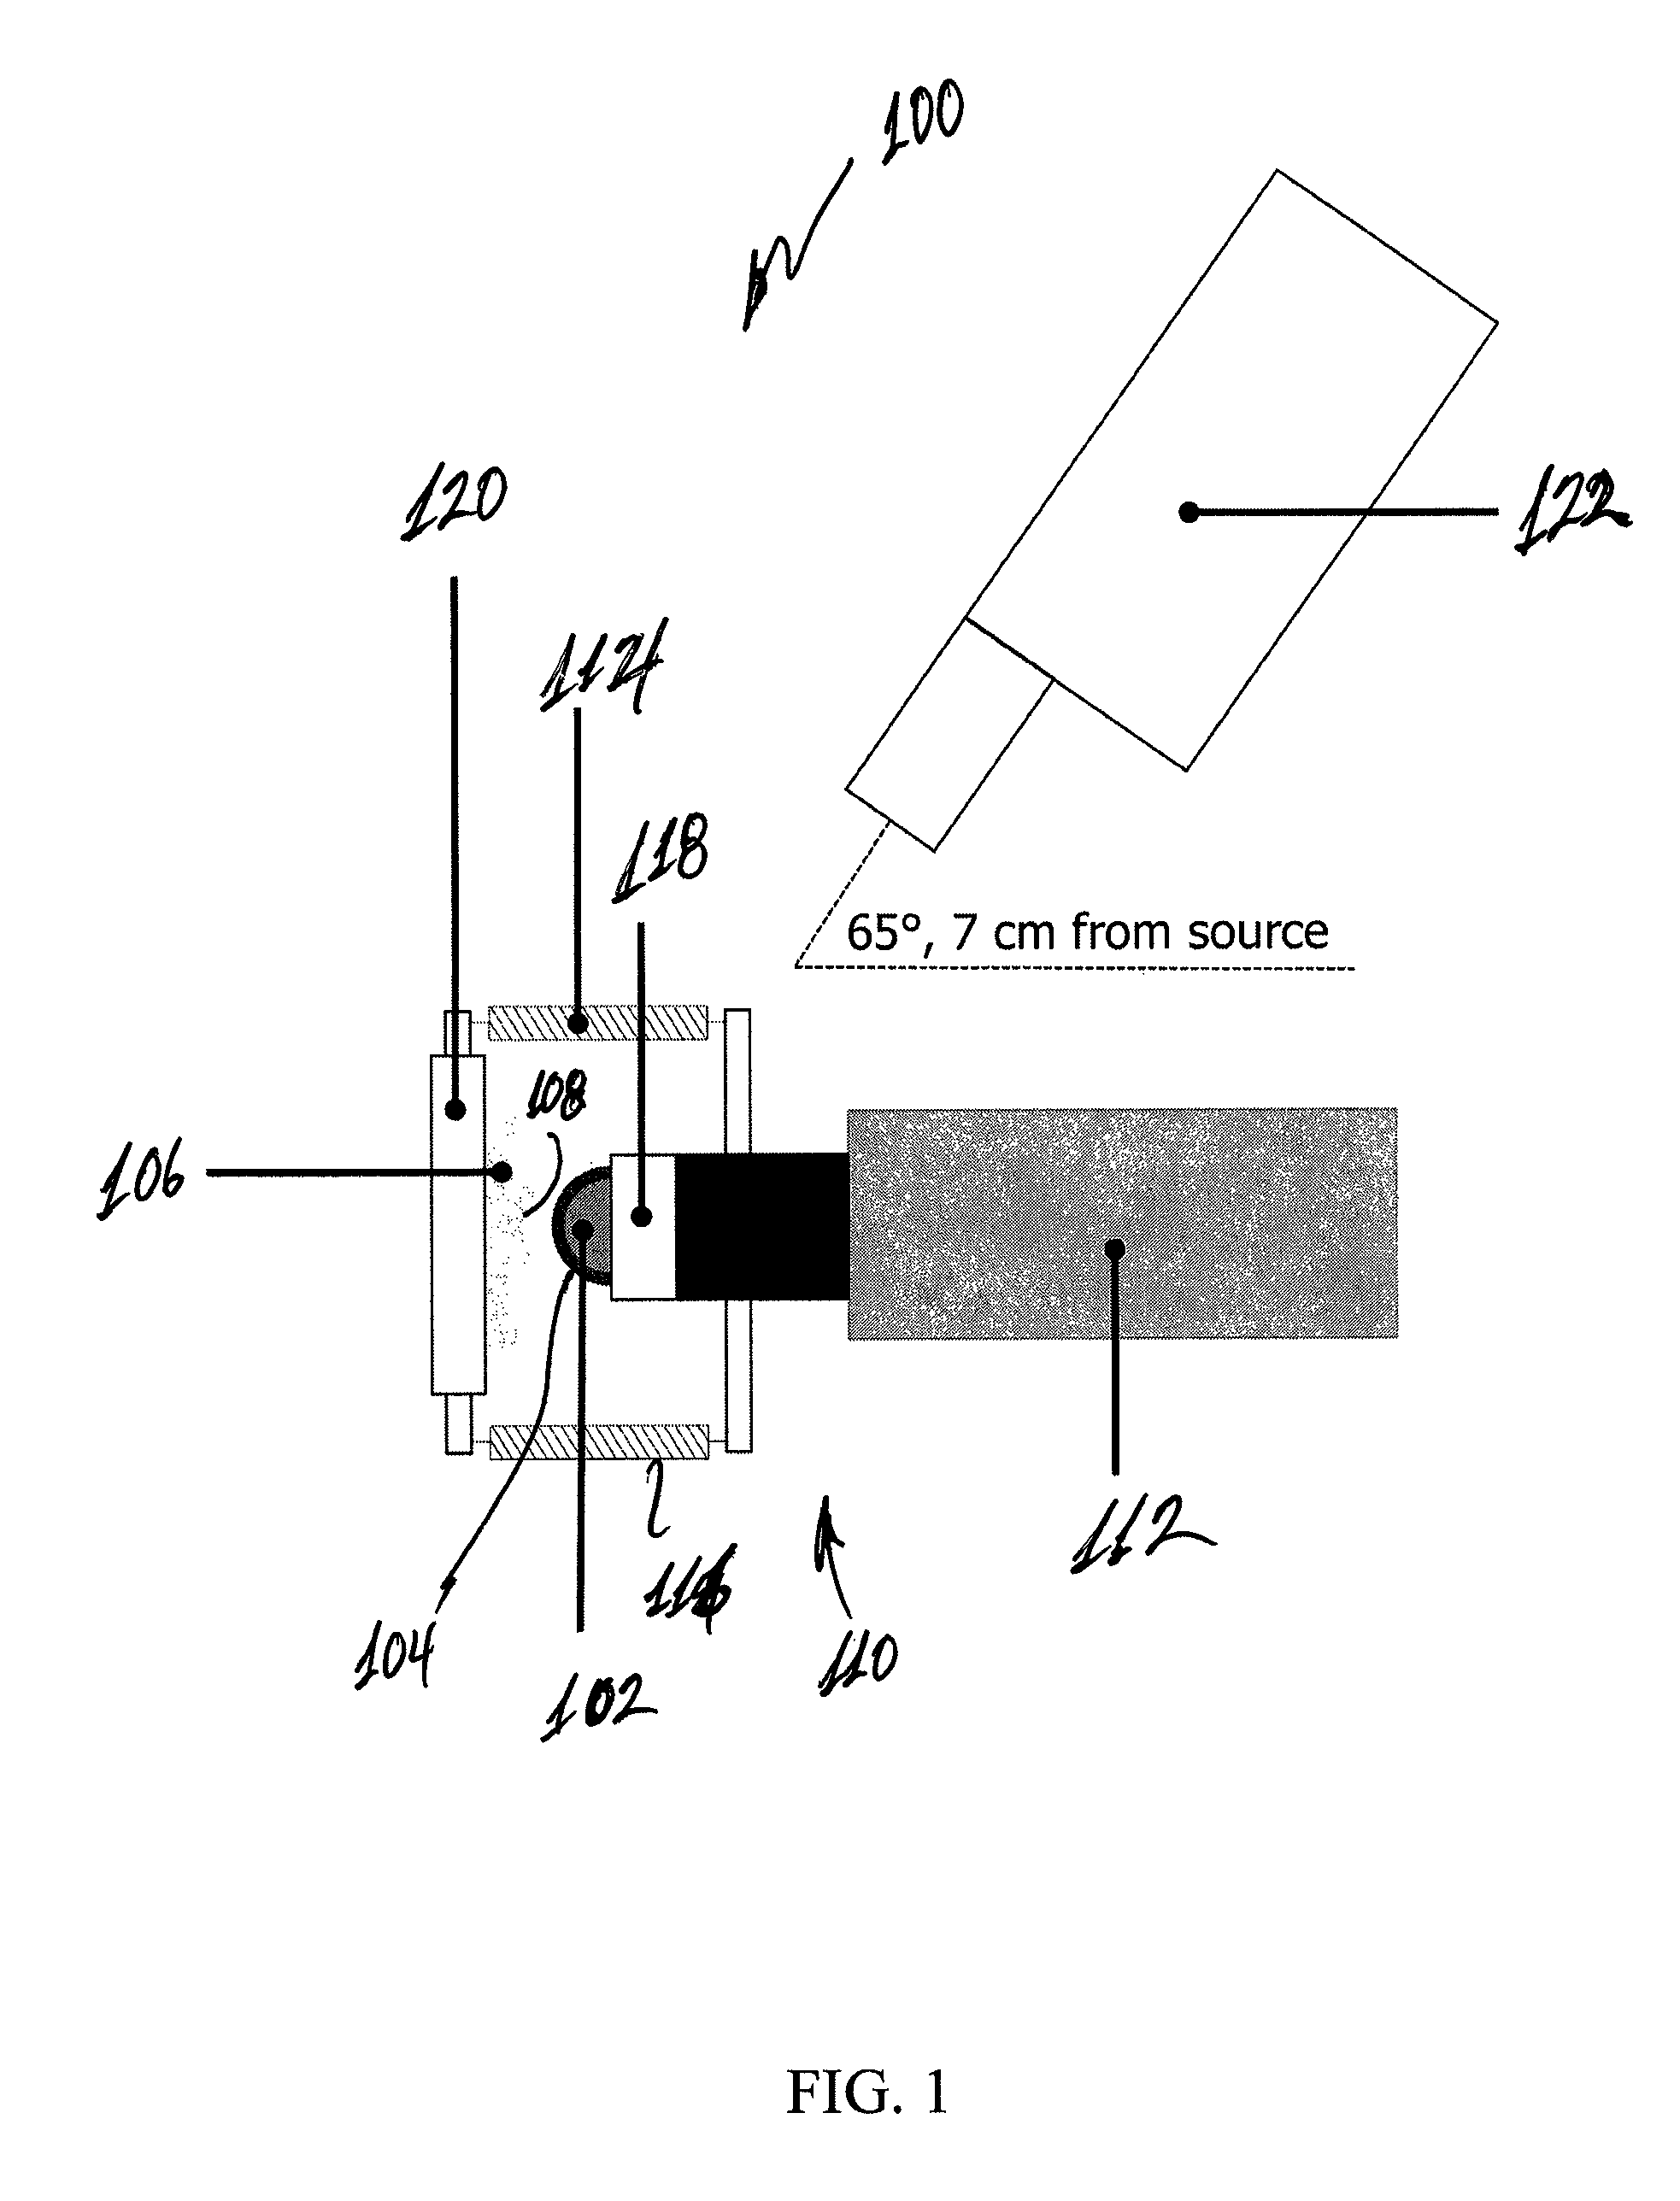 Triboelectric X-ray source